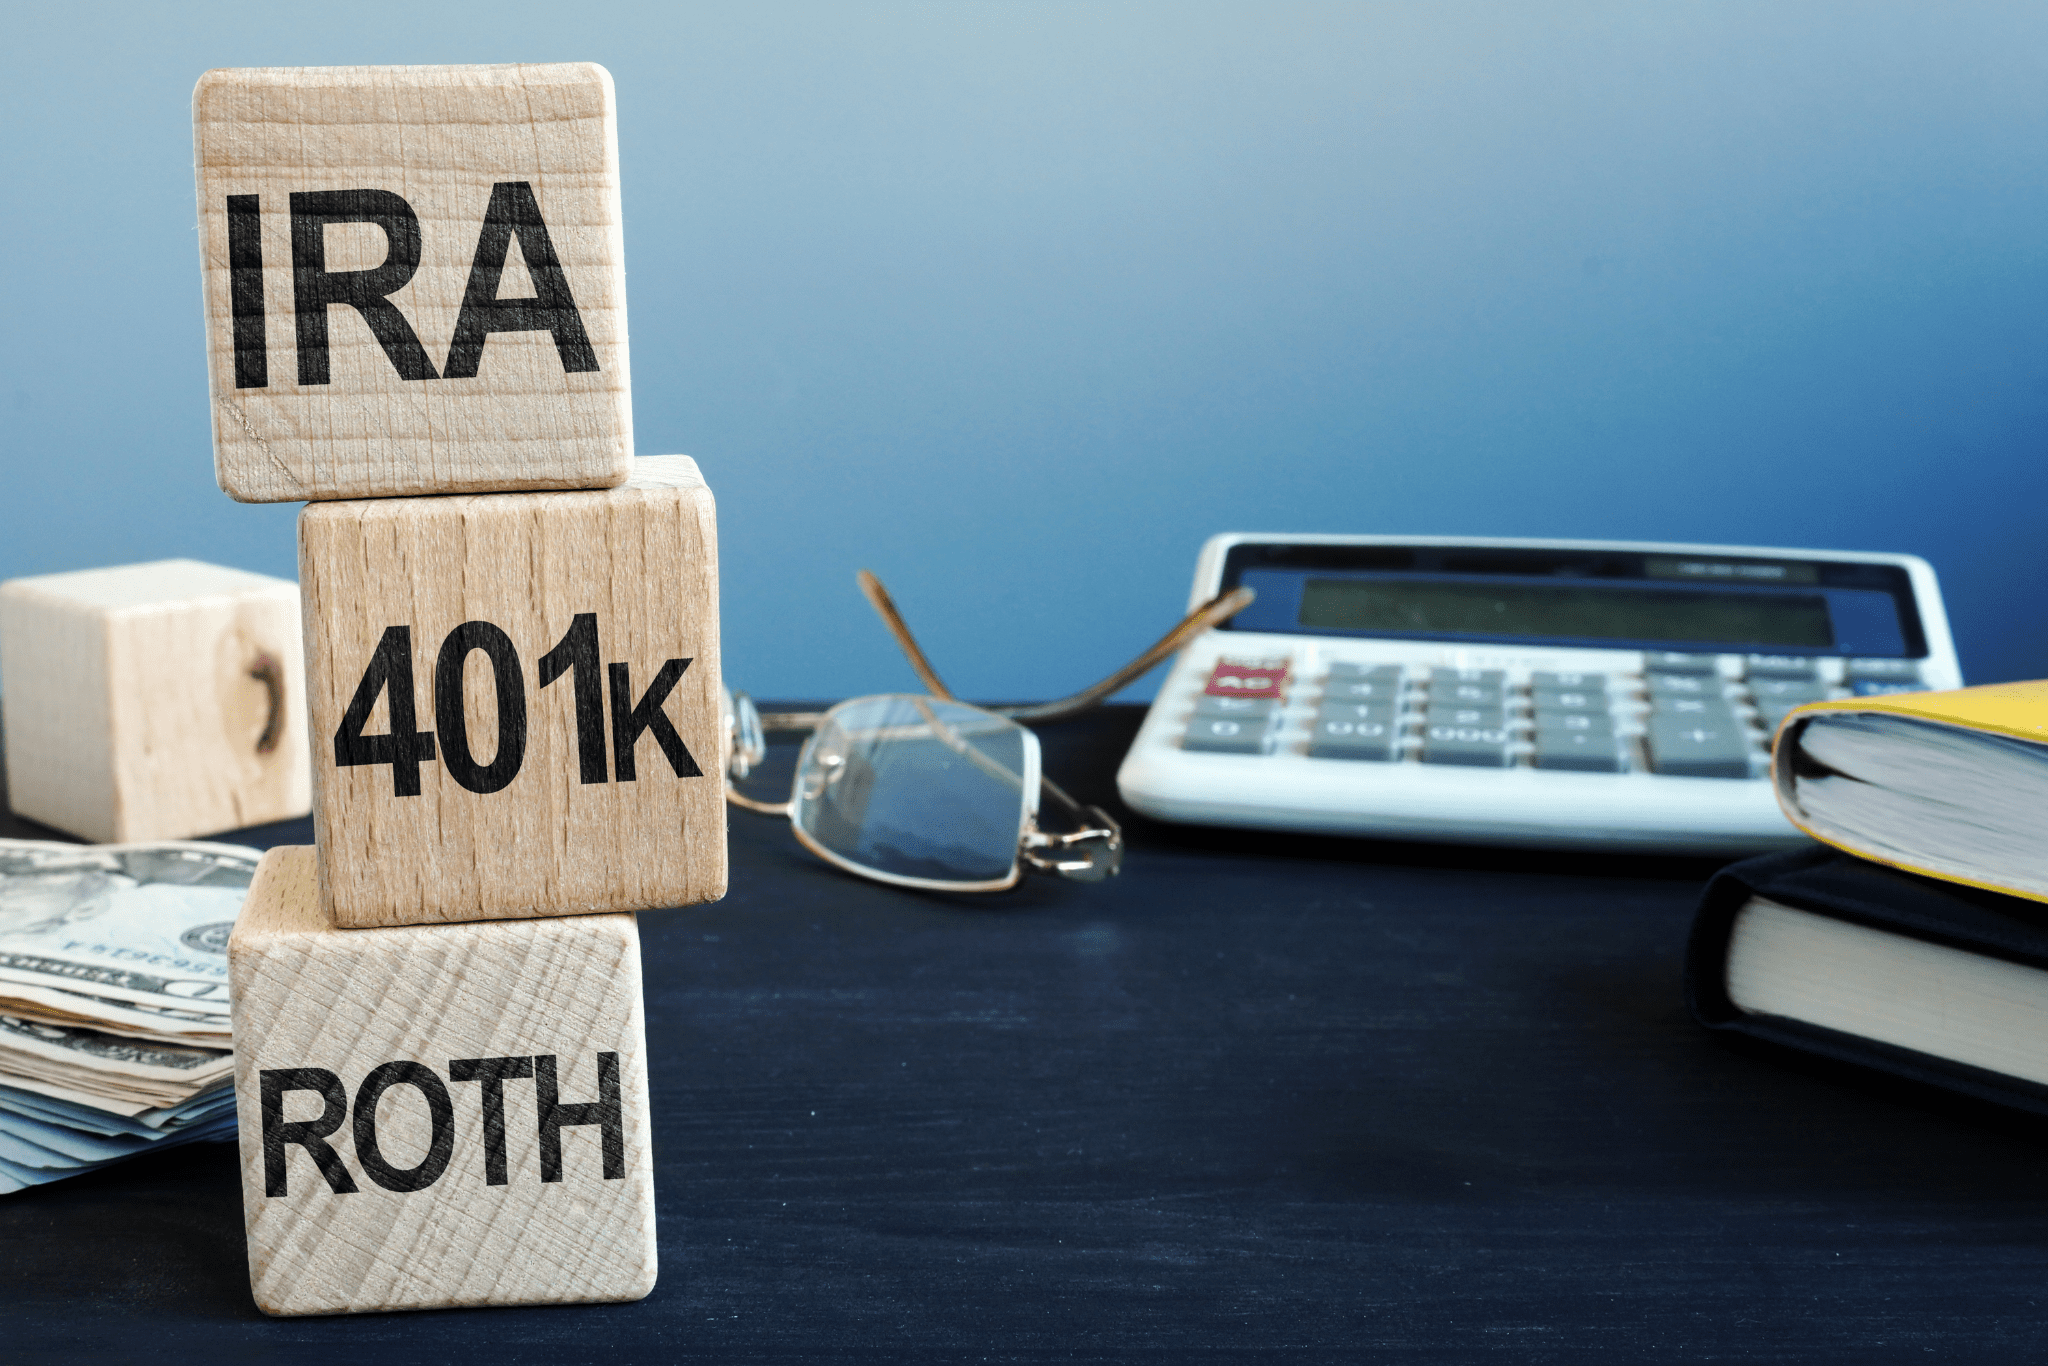 Is This an Opportune Time to Convert Your Traditional IRA to a Roth IRA?